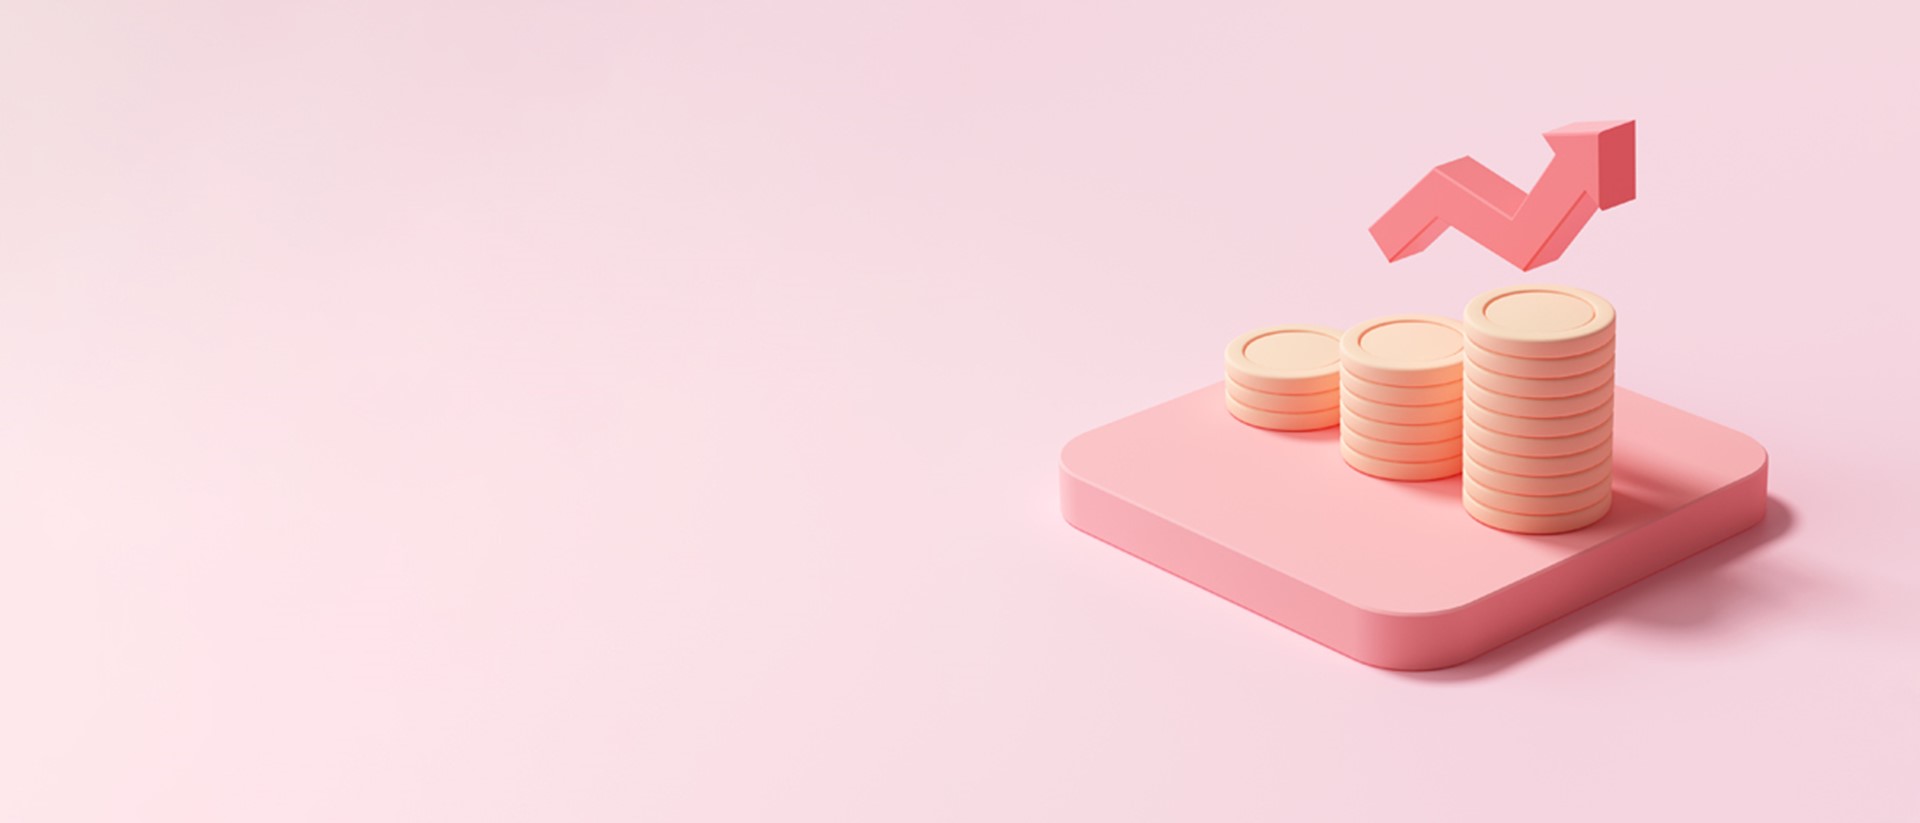 Image of a stack of pink coins with an pink arrow going up against a pink background